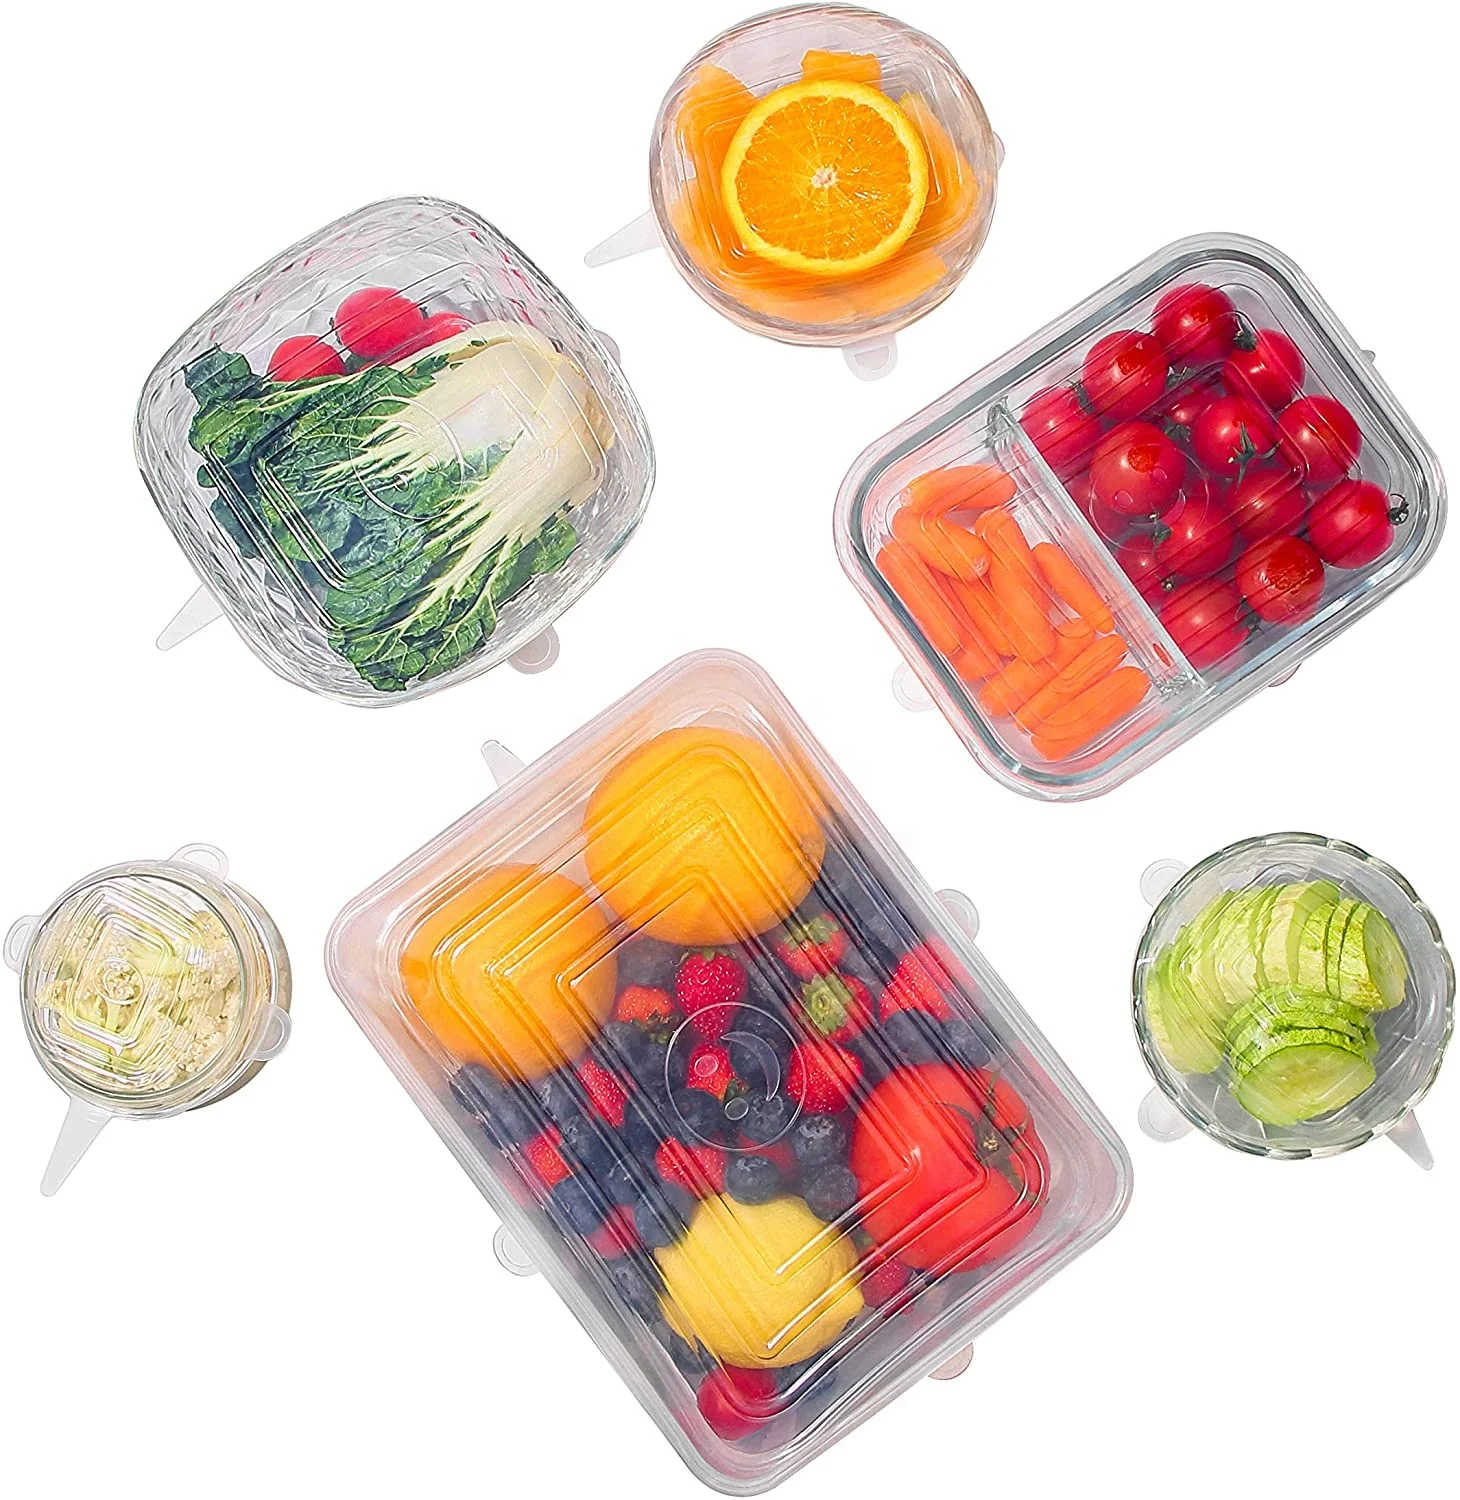 
Reusable 7 pack of Silicone Stretch Lids for Keeping Food Fresh Dishwasher & Freezer Safe  (1600054145449)